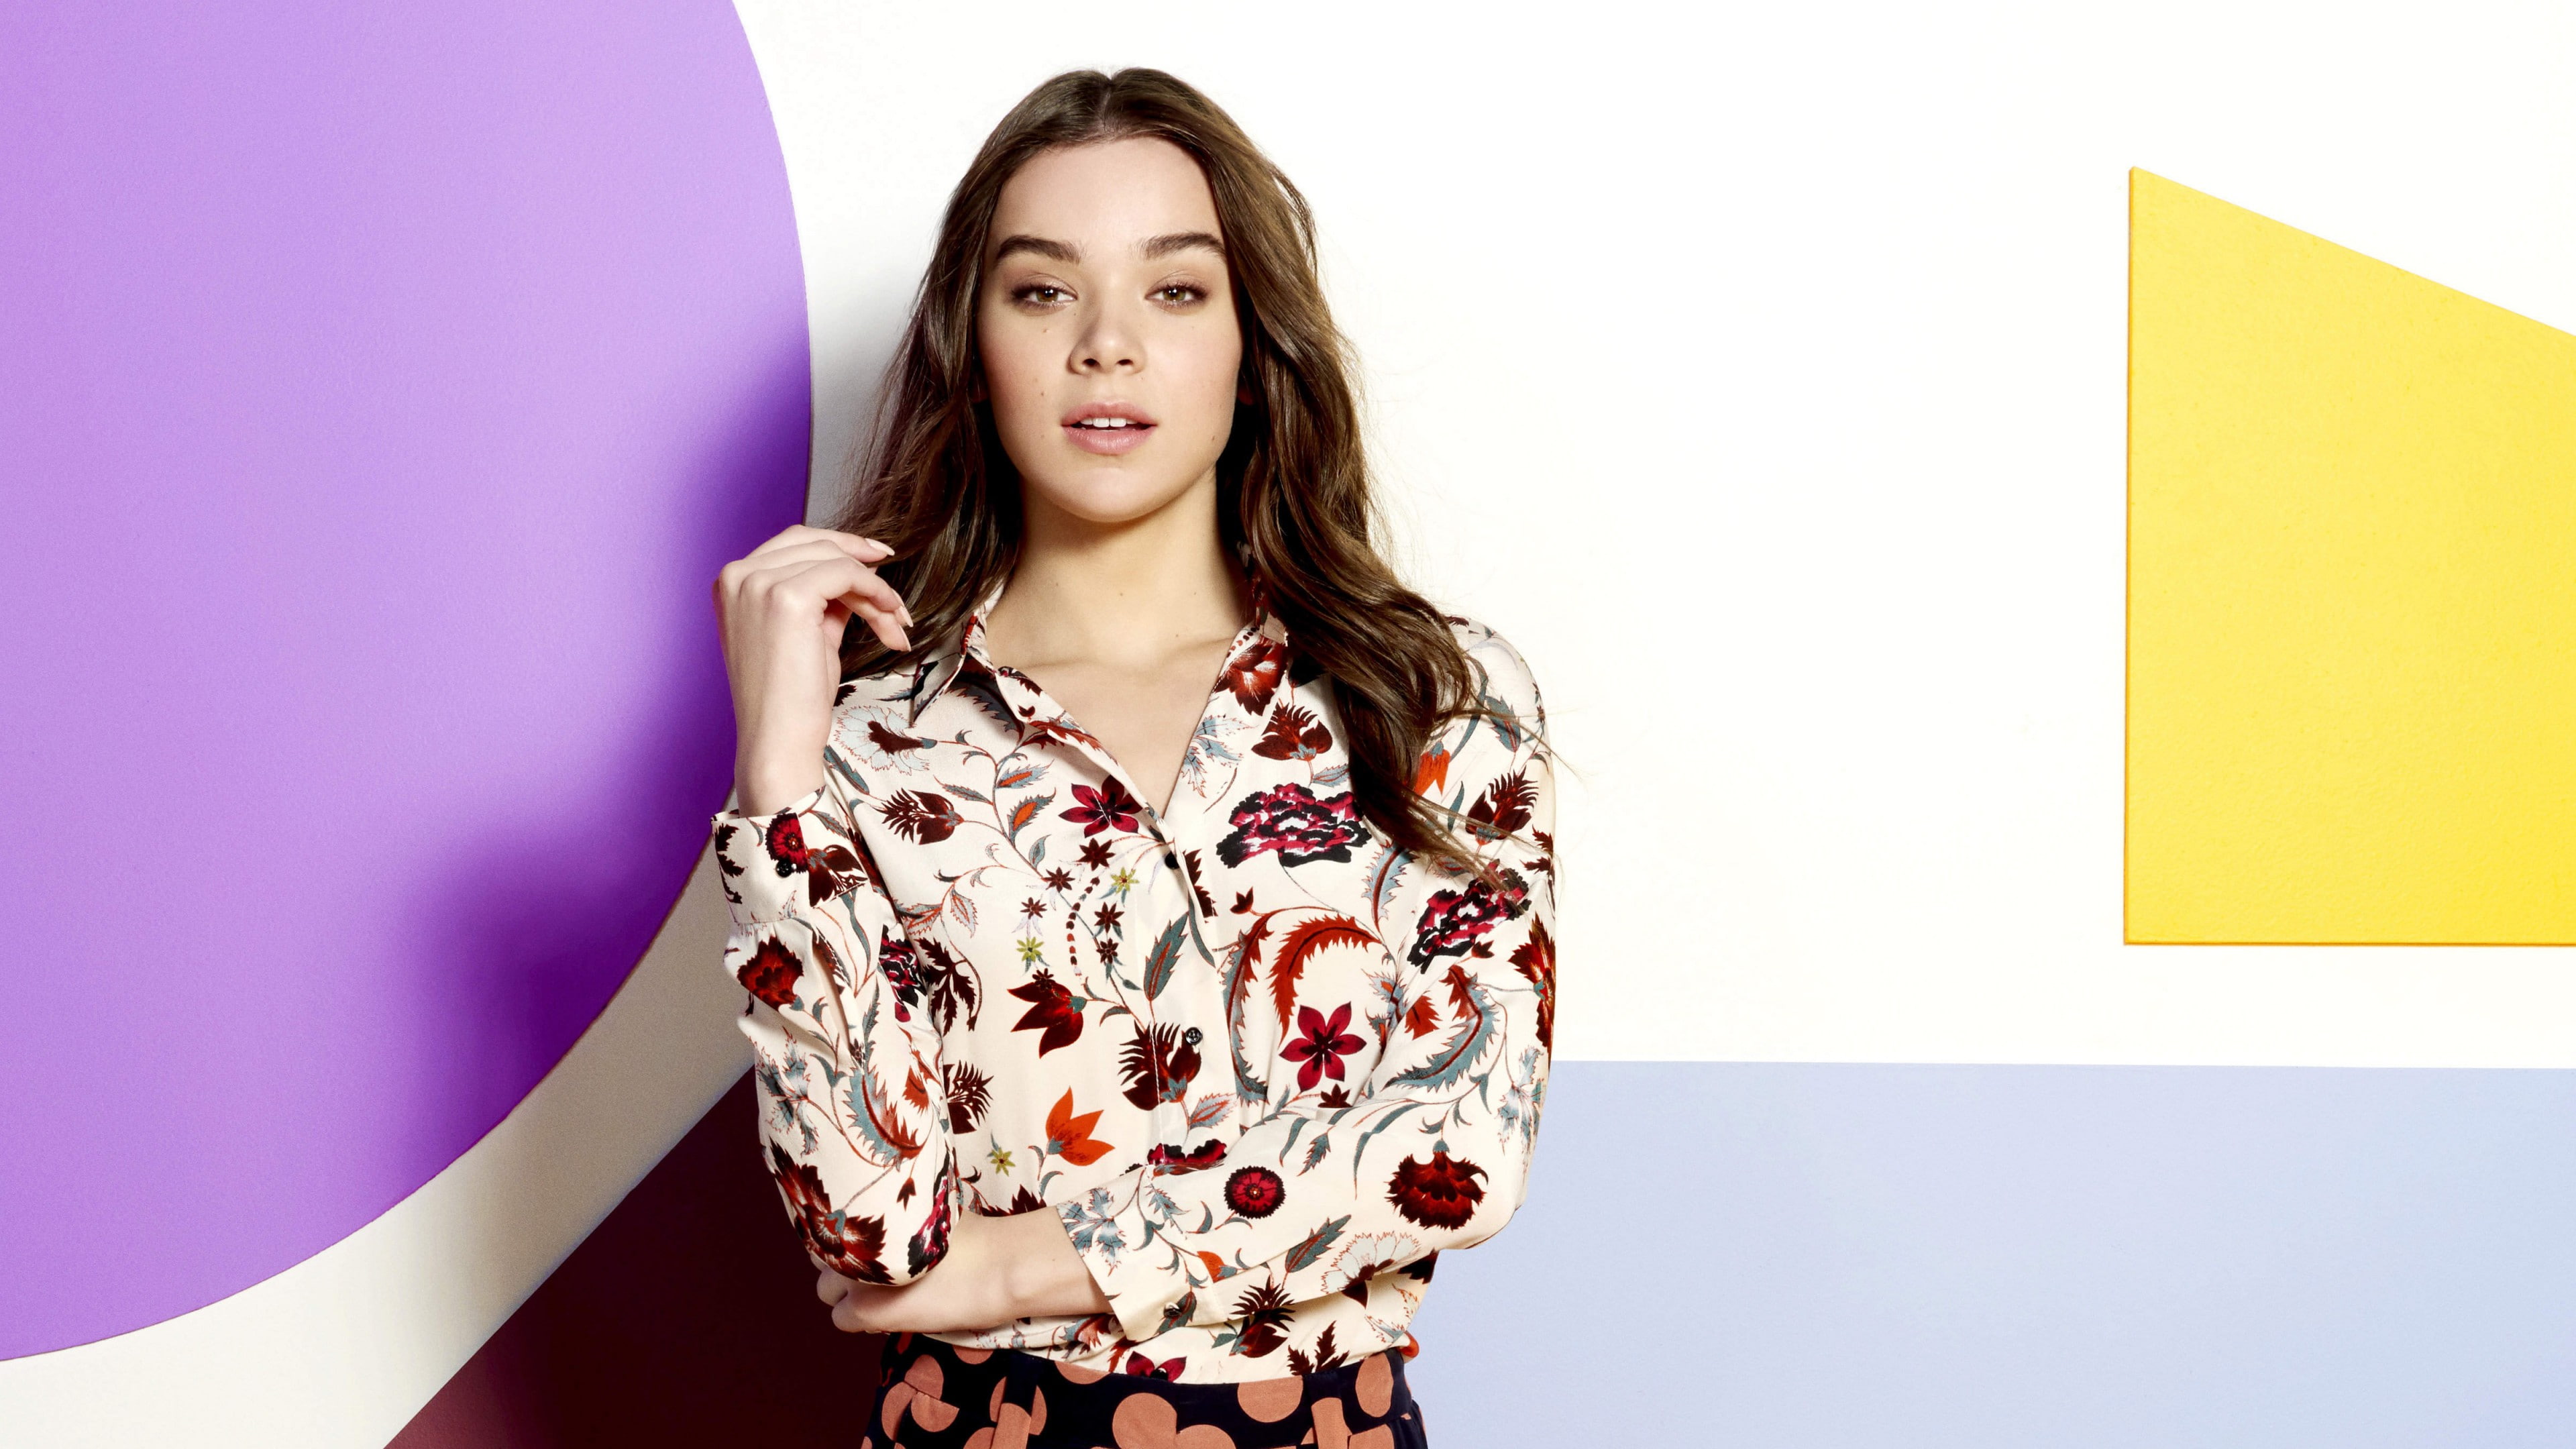 woman wearing white and black floral long-sleeved shirt, Hailee Steinfeld